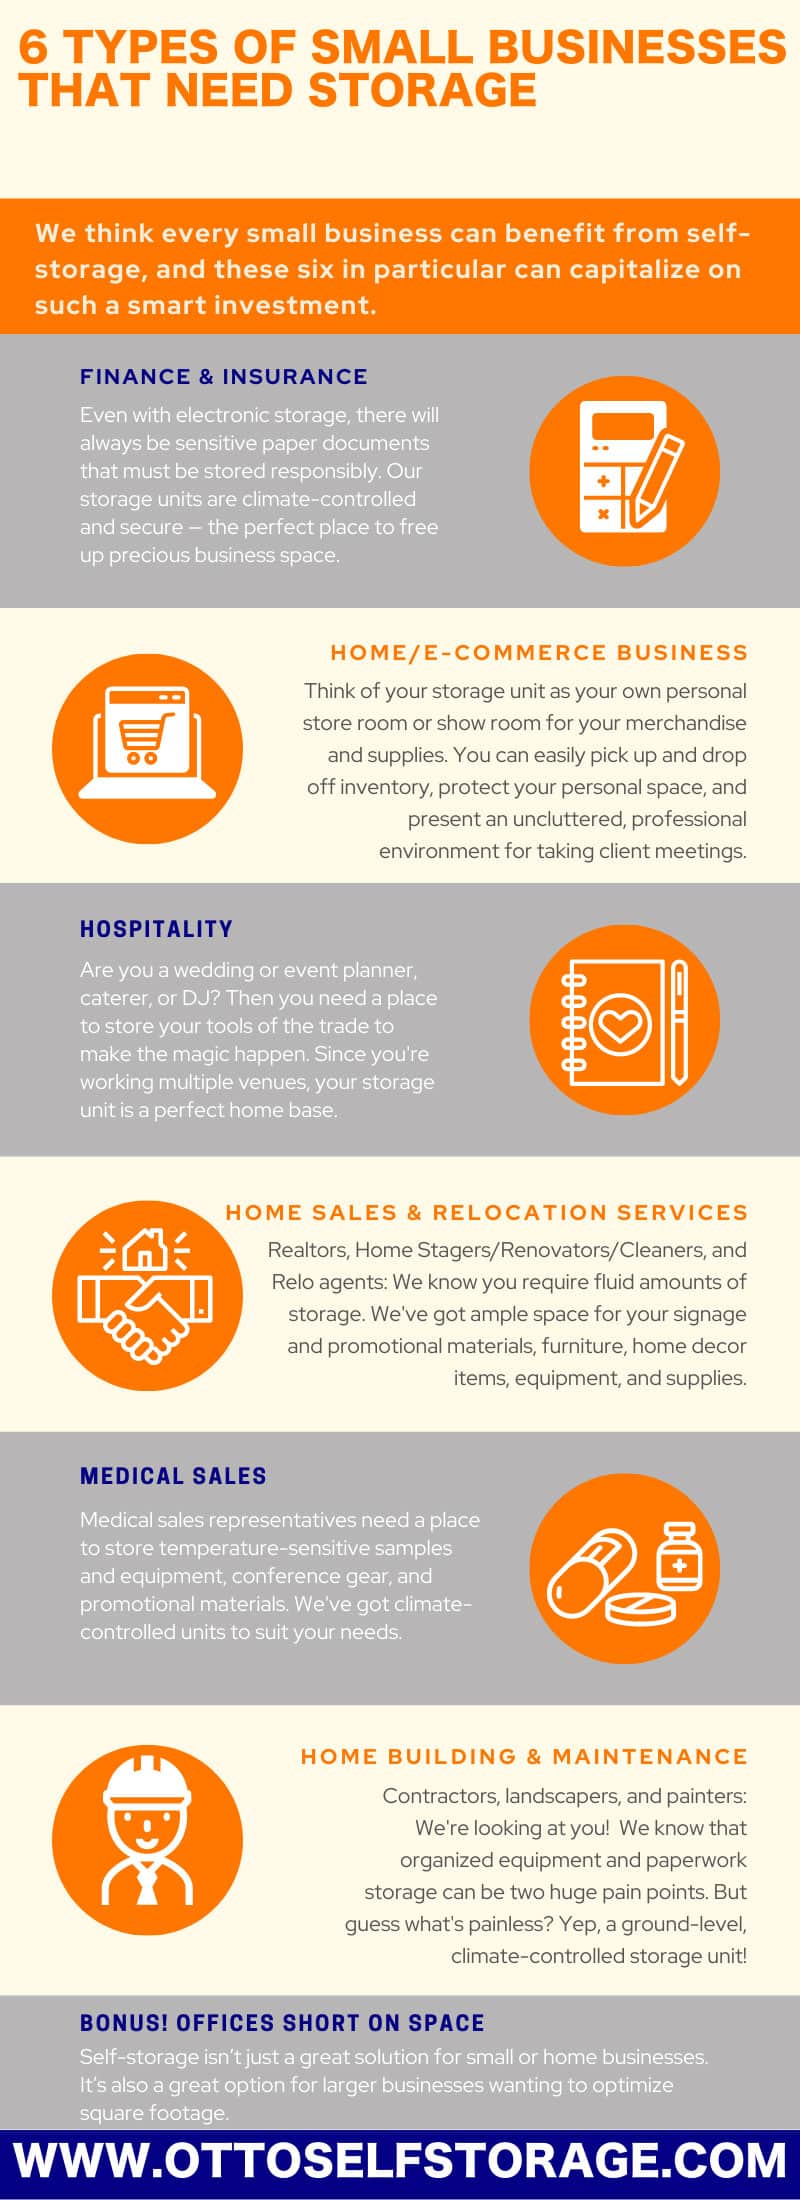 6 Types of Small Businesses That Need Storage Infographic